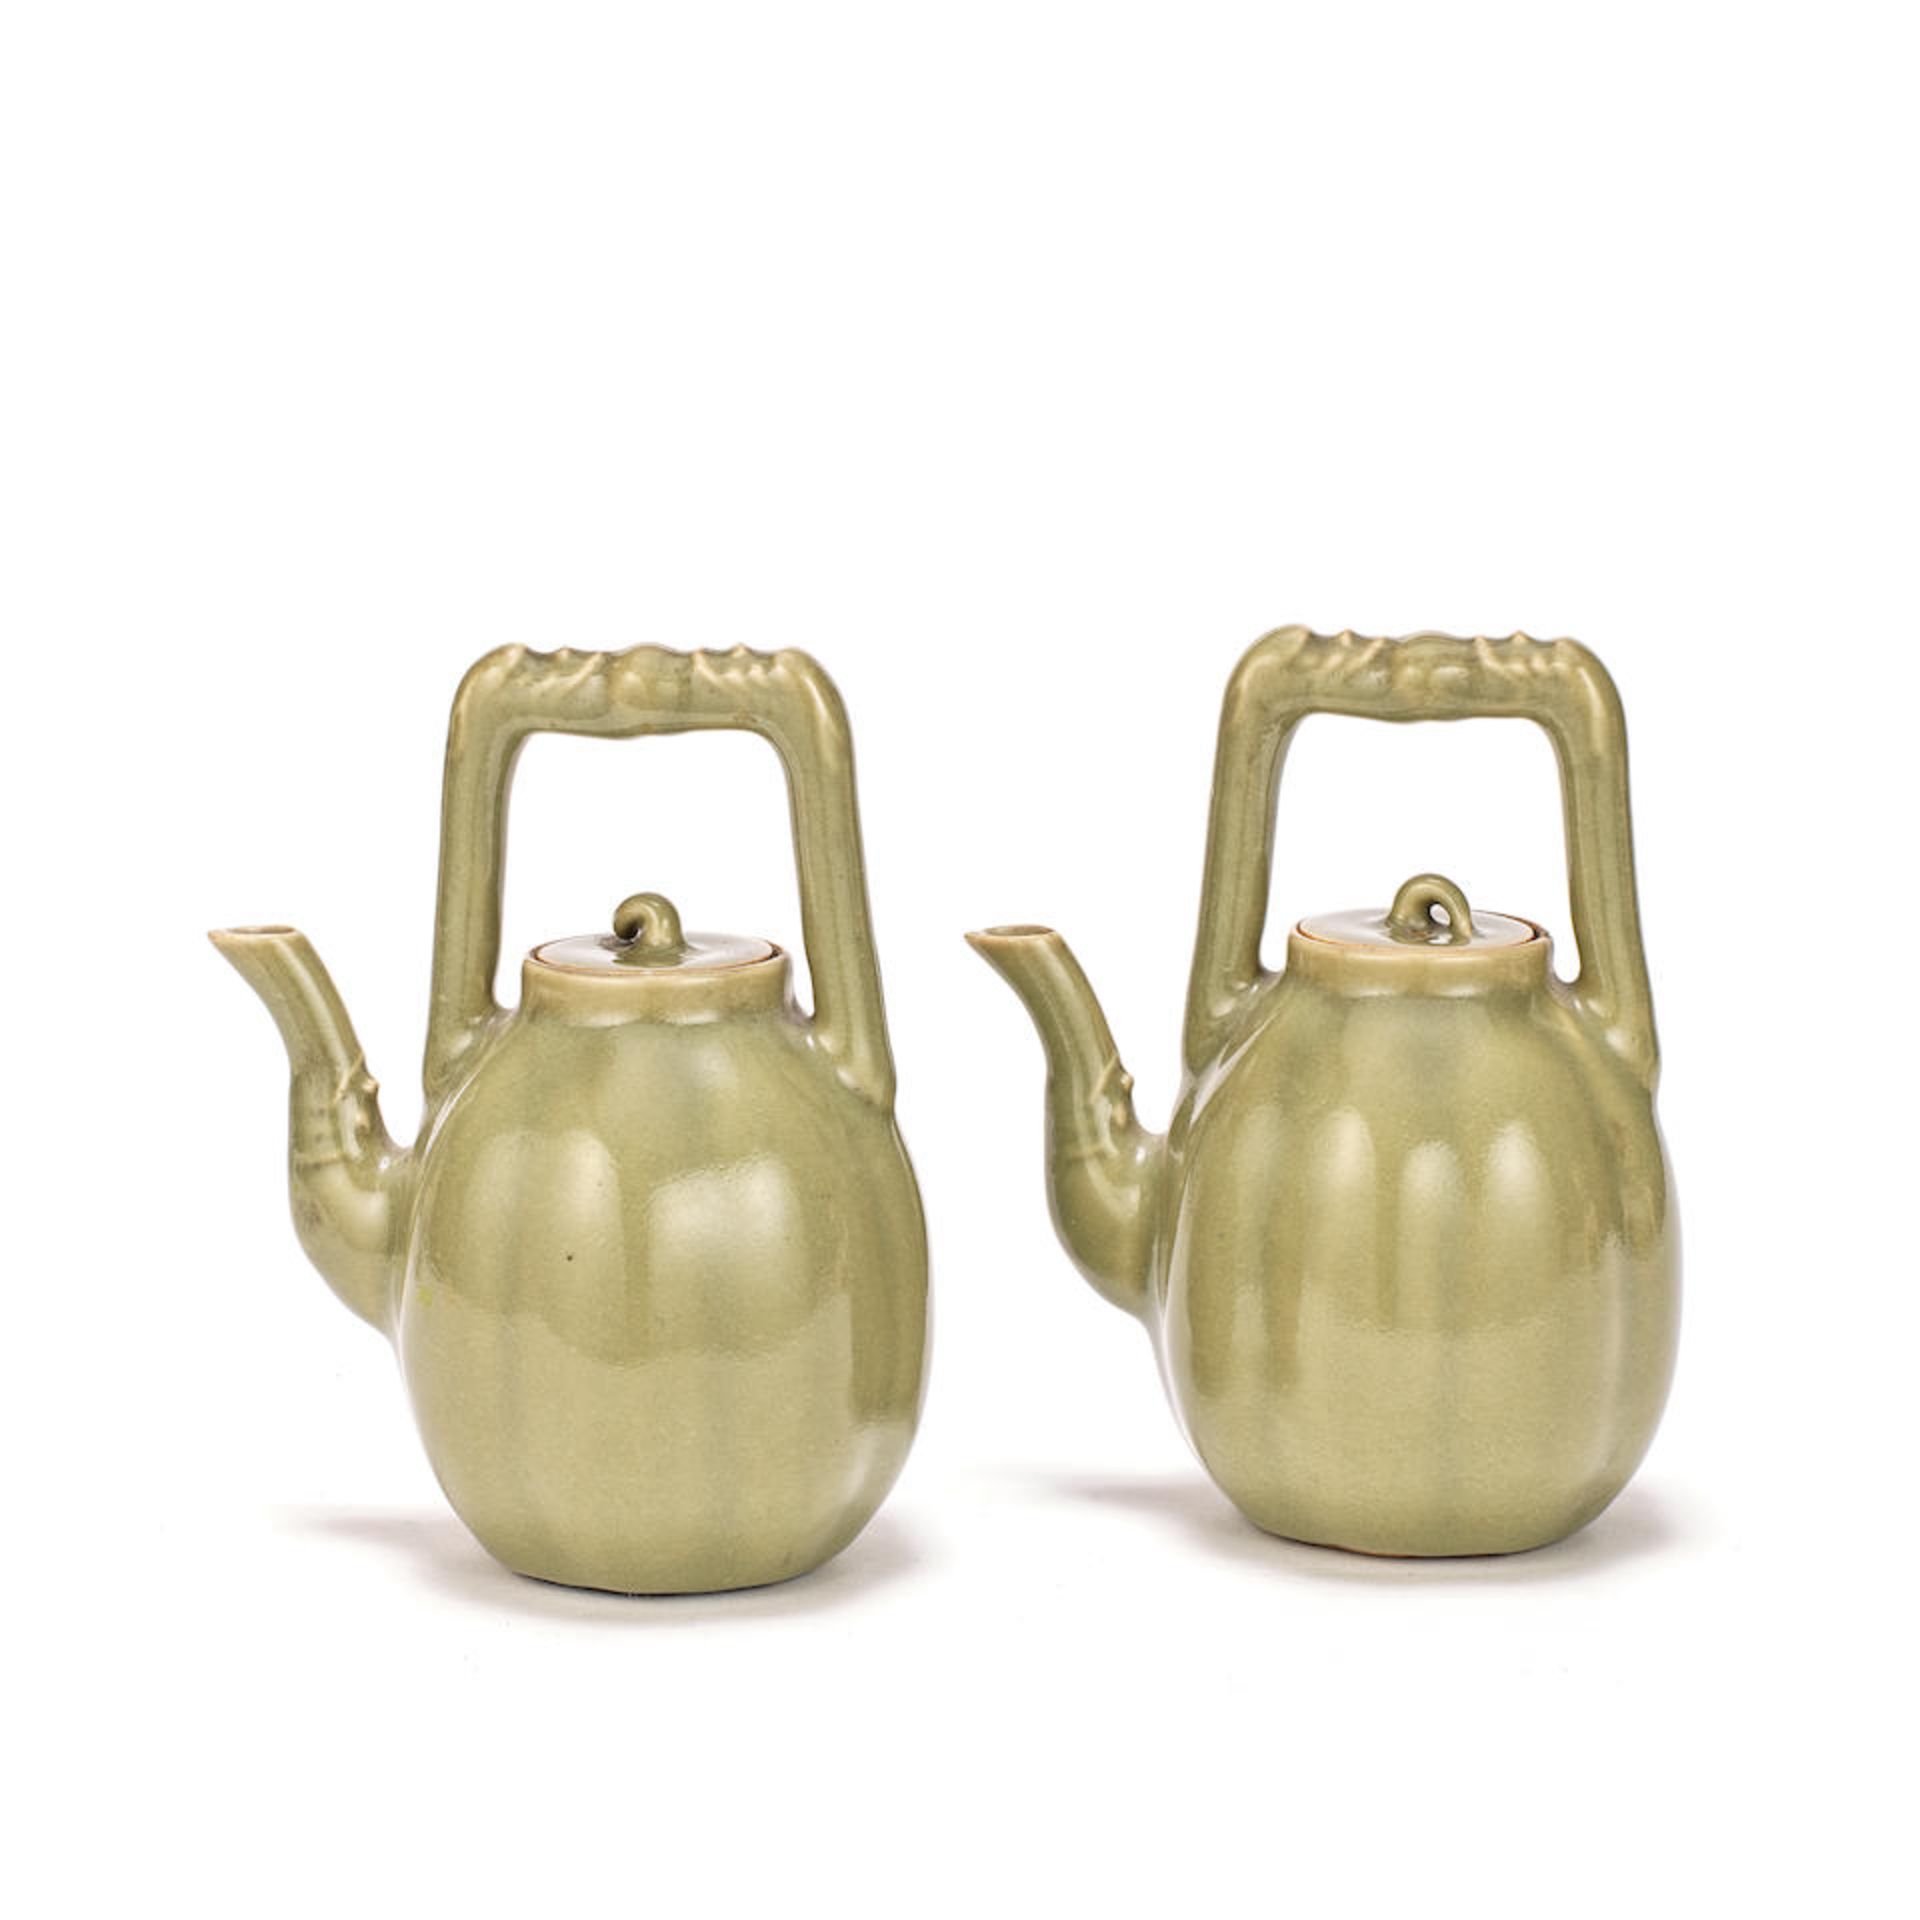 A PAIR OF CELADON-GLAZED TEAPOTS AND COVERS Qianlong seal marks, 19th/early 20th century (4)